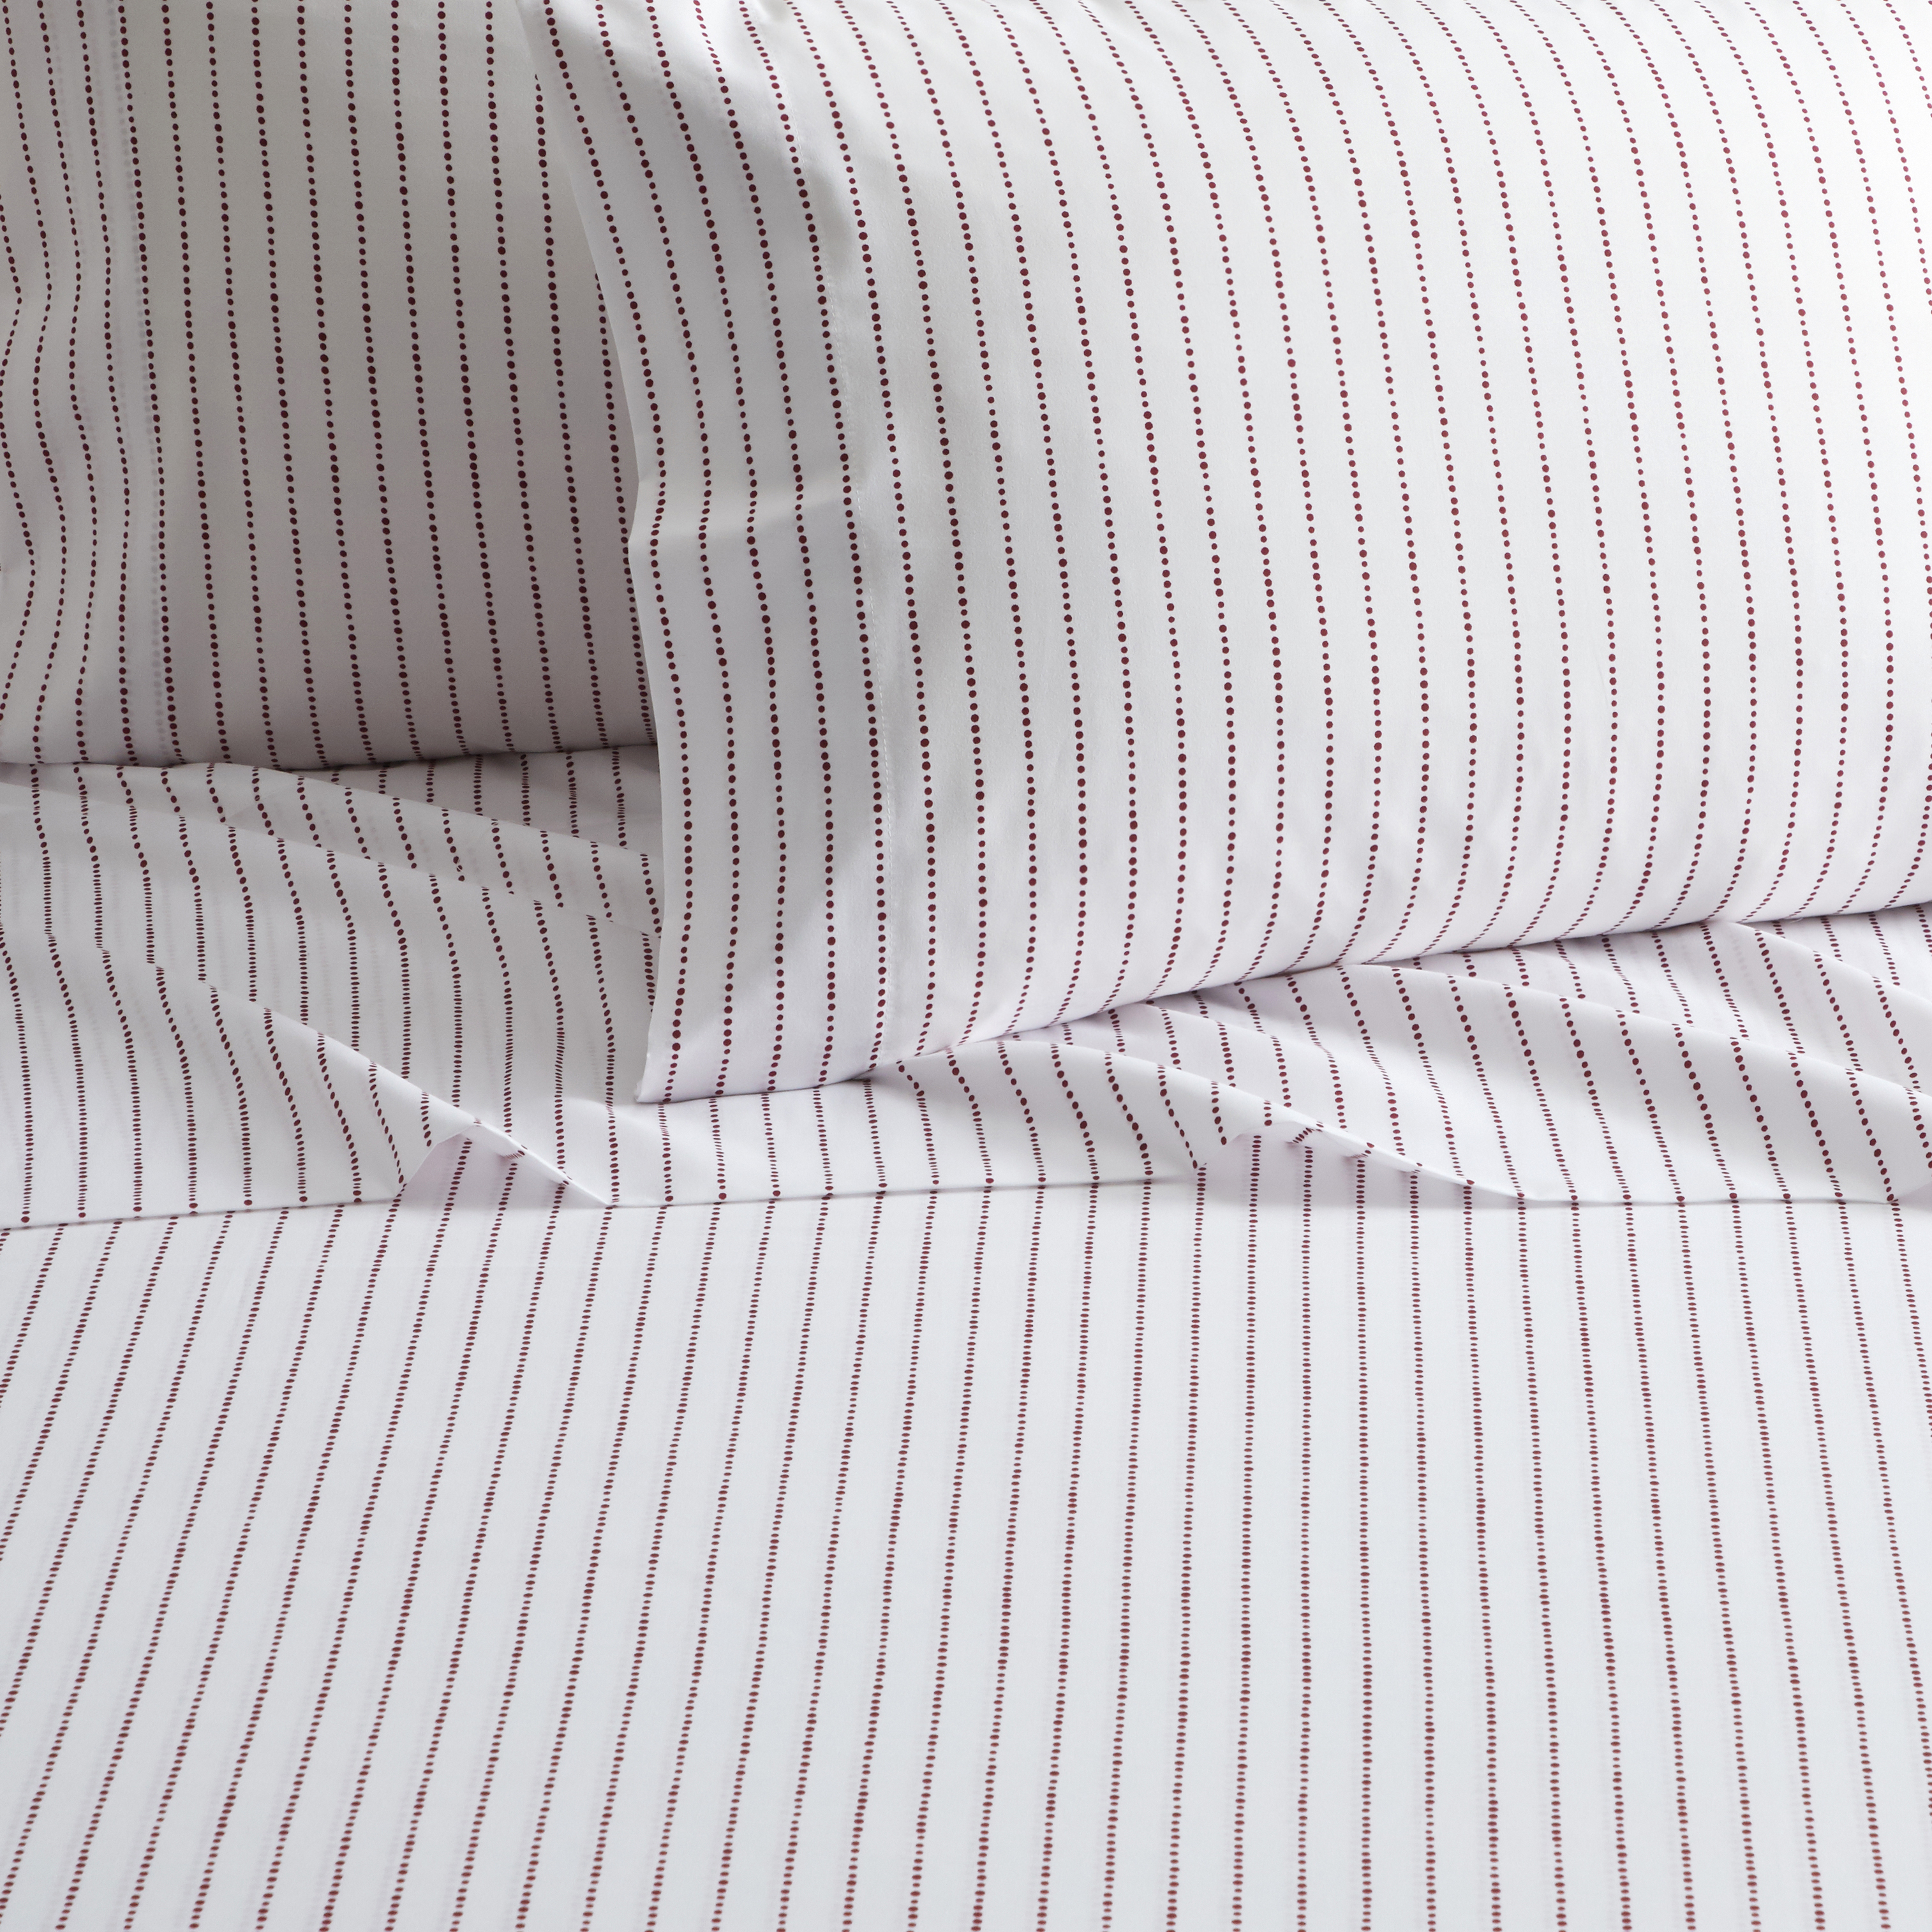 Caley 3 Or 4 Piece Sheet Set Solid White With Dot Striped Pattern Print Design - Wine Red, Twin